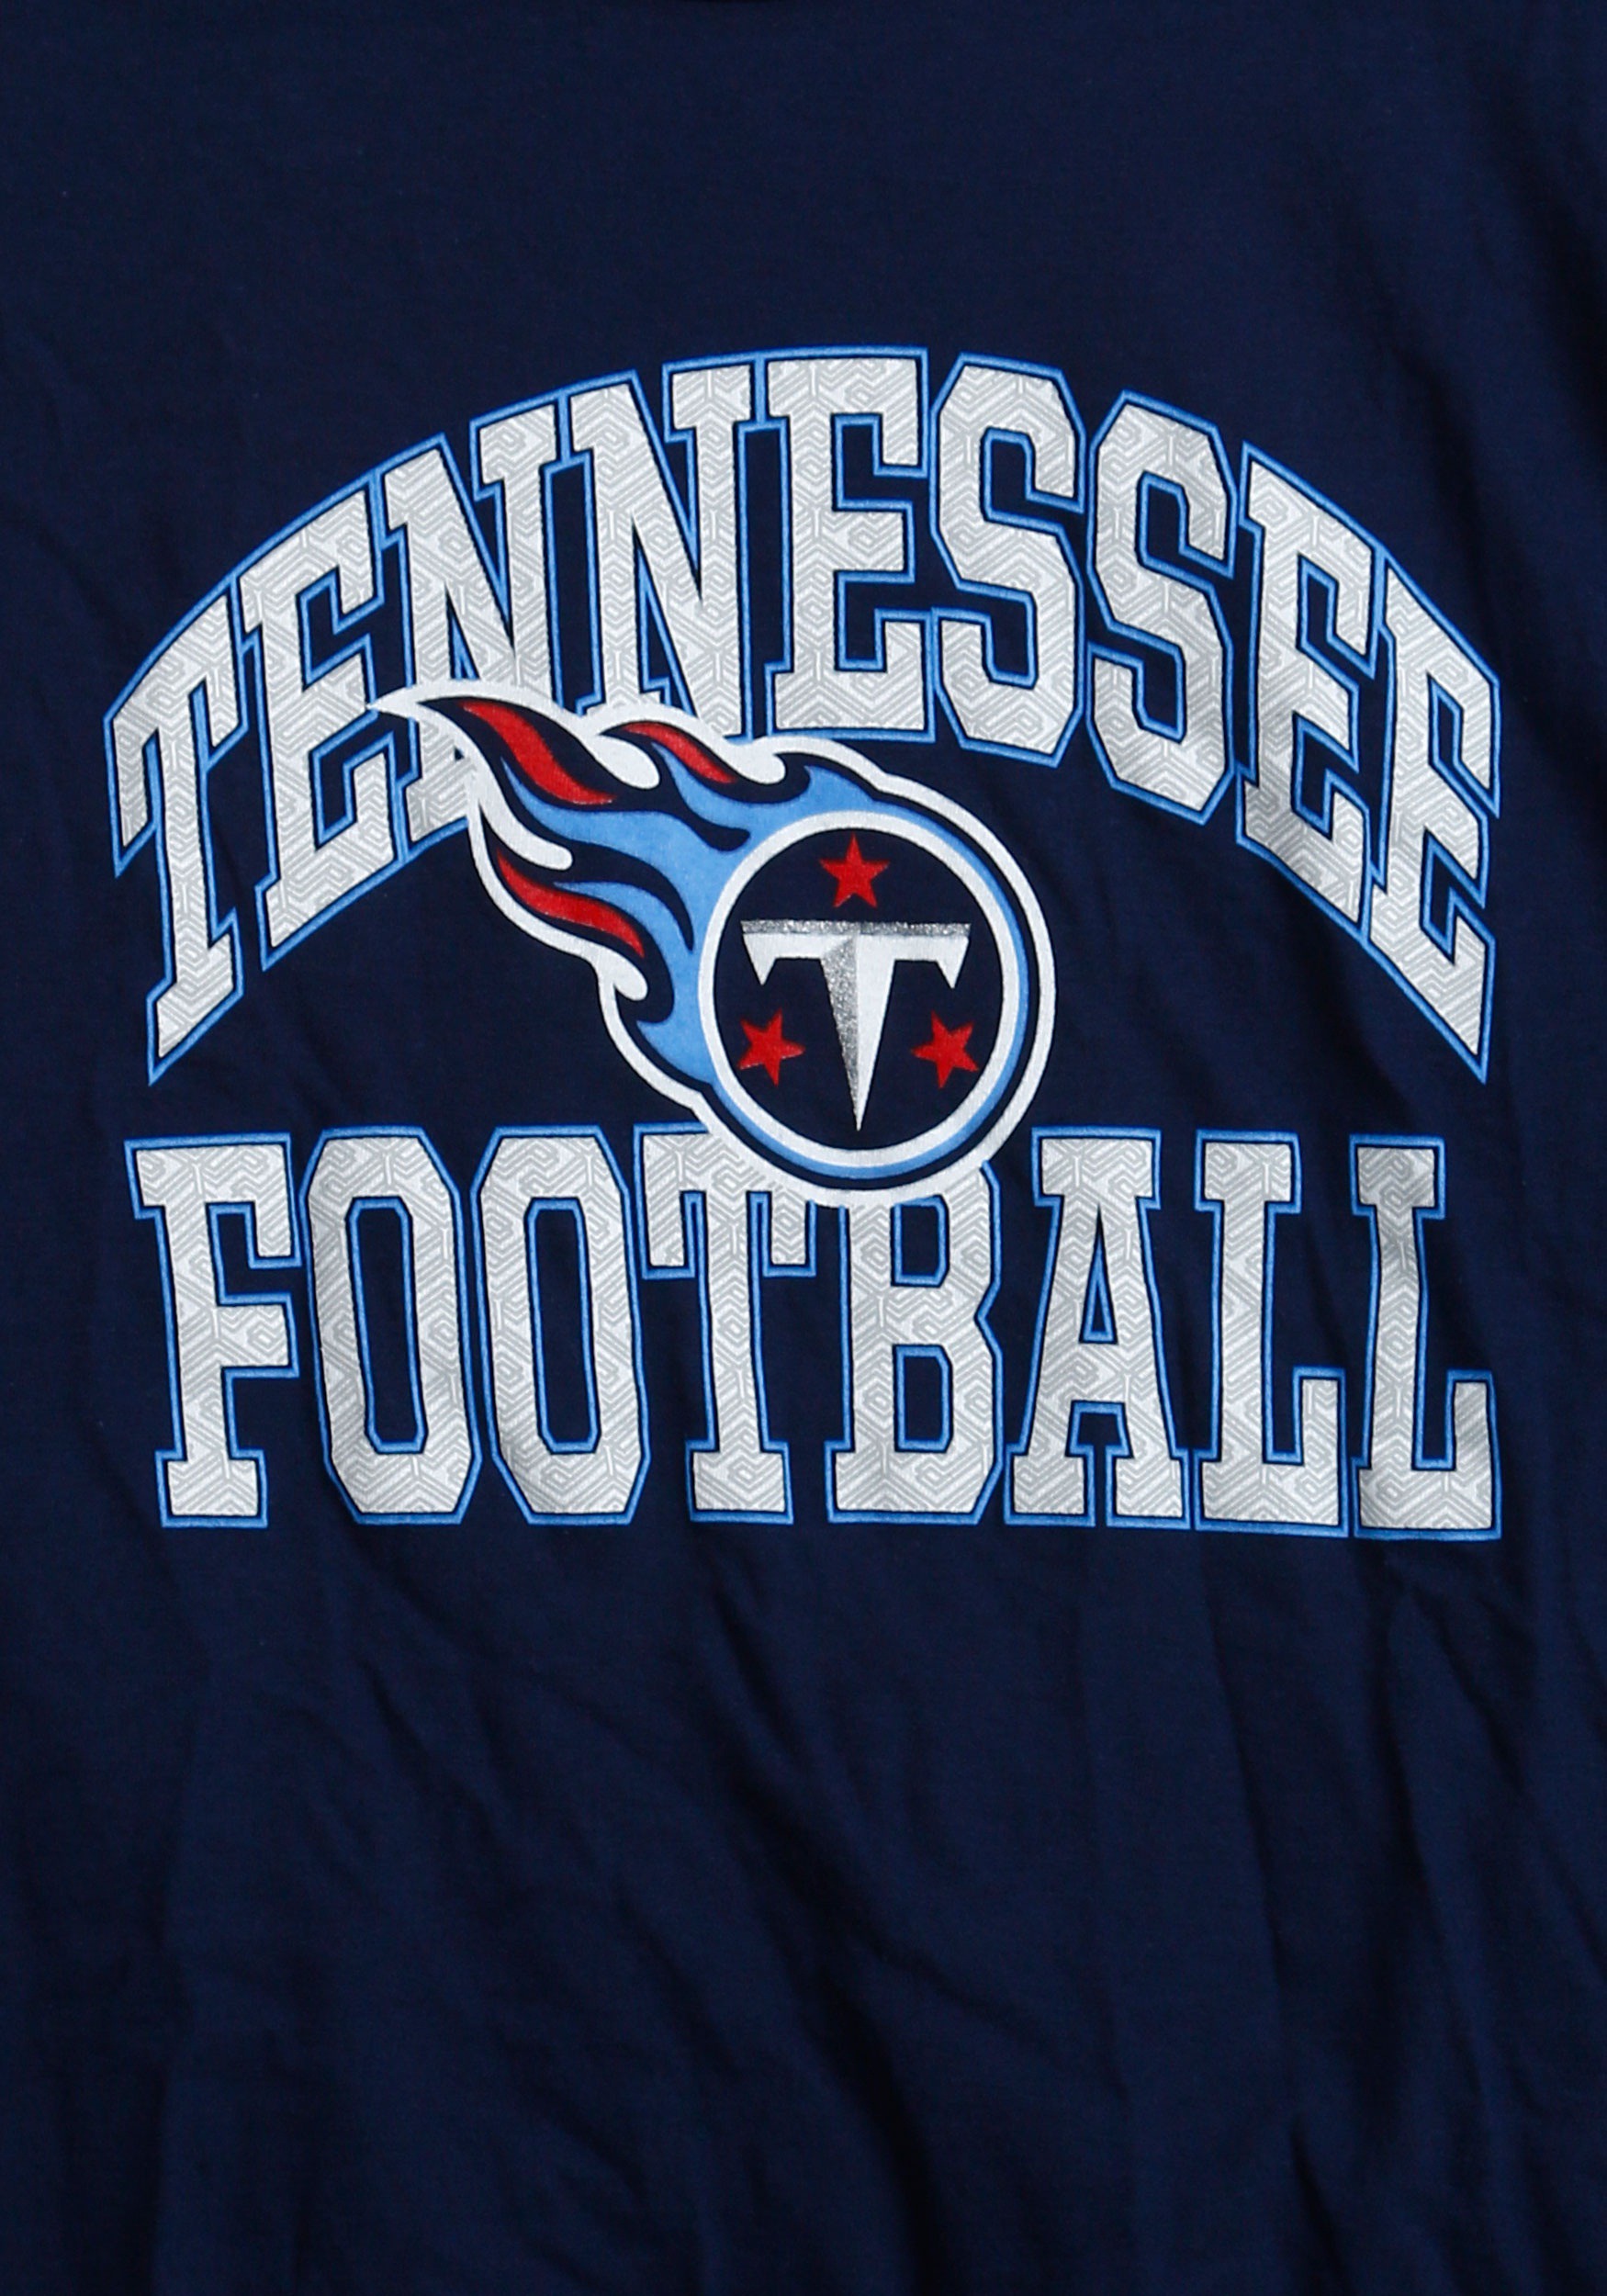 Tennessee Titans Franchise Fit Womens T 